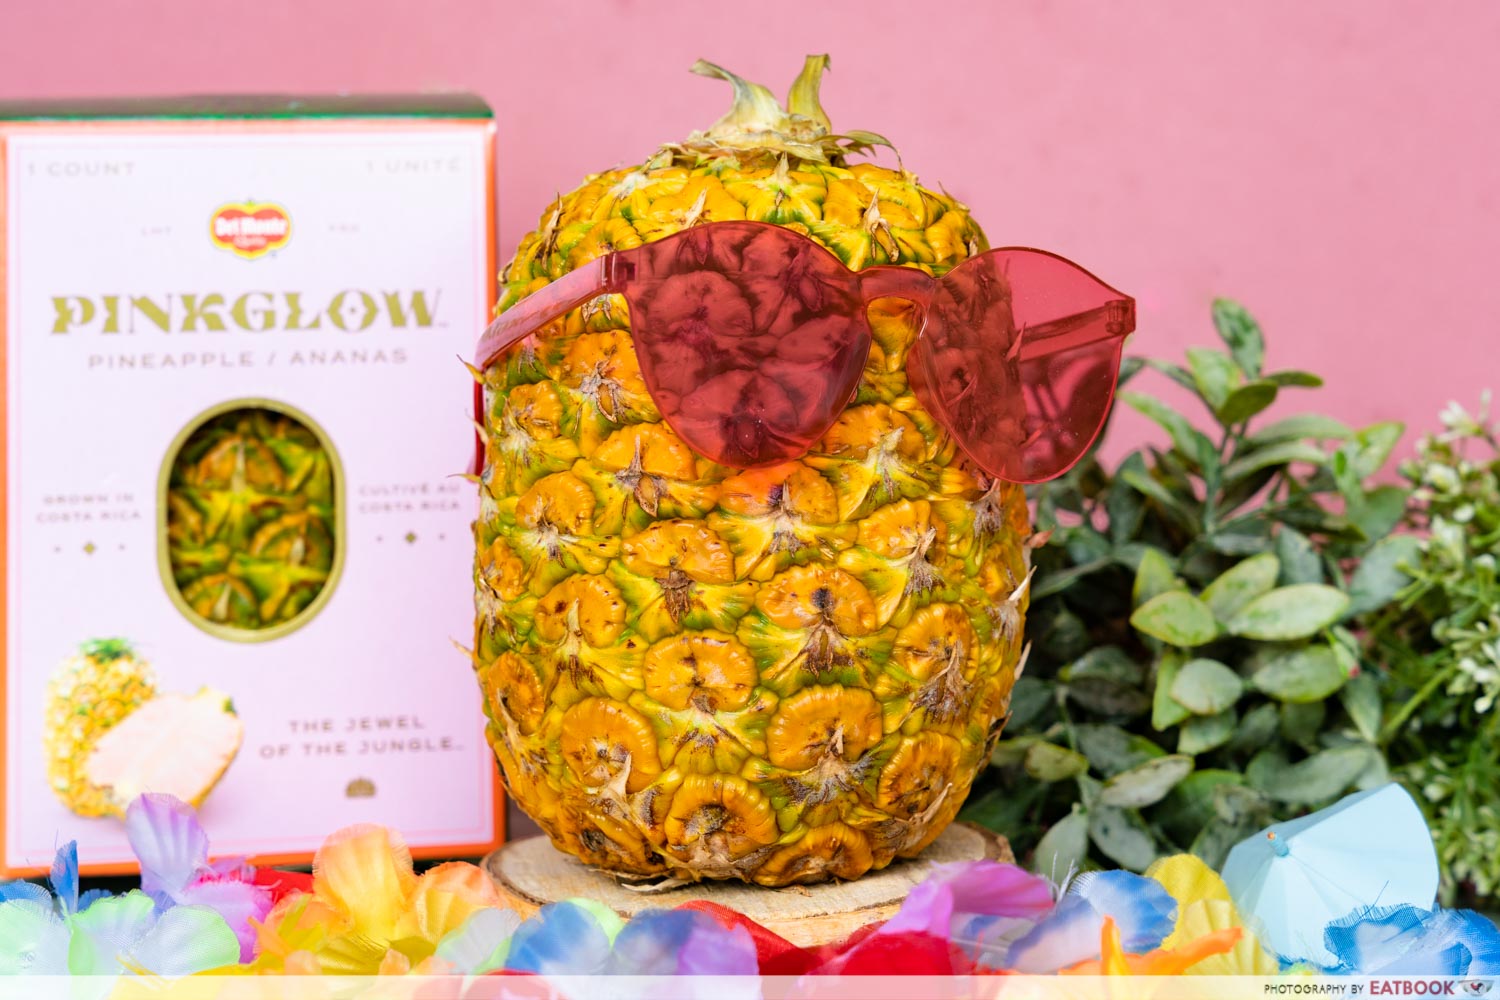 pinkglow pineapples now in singapore